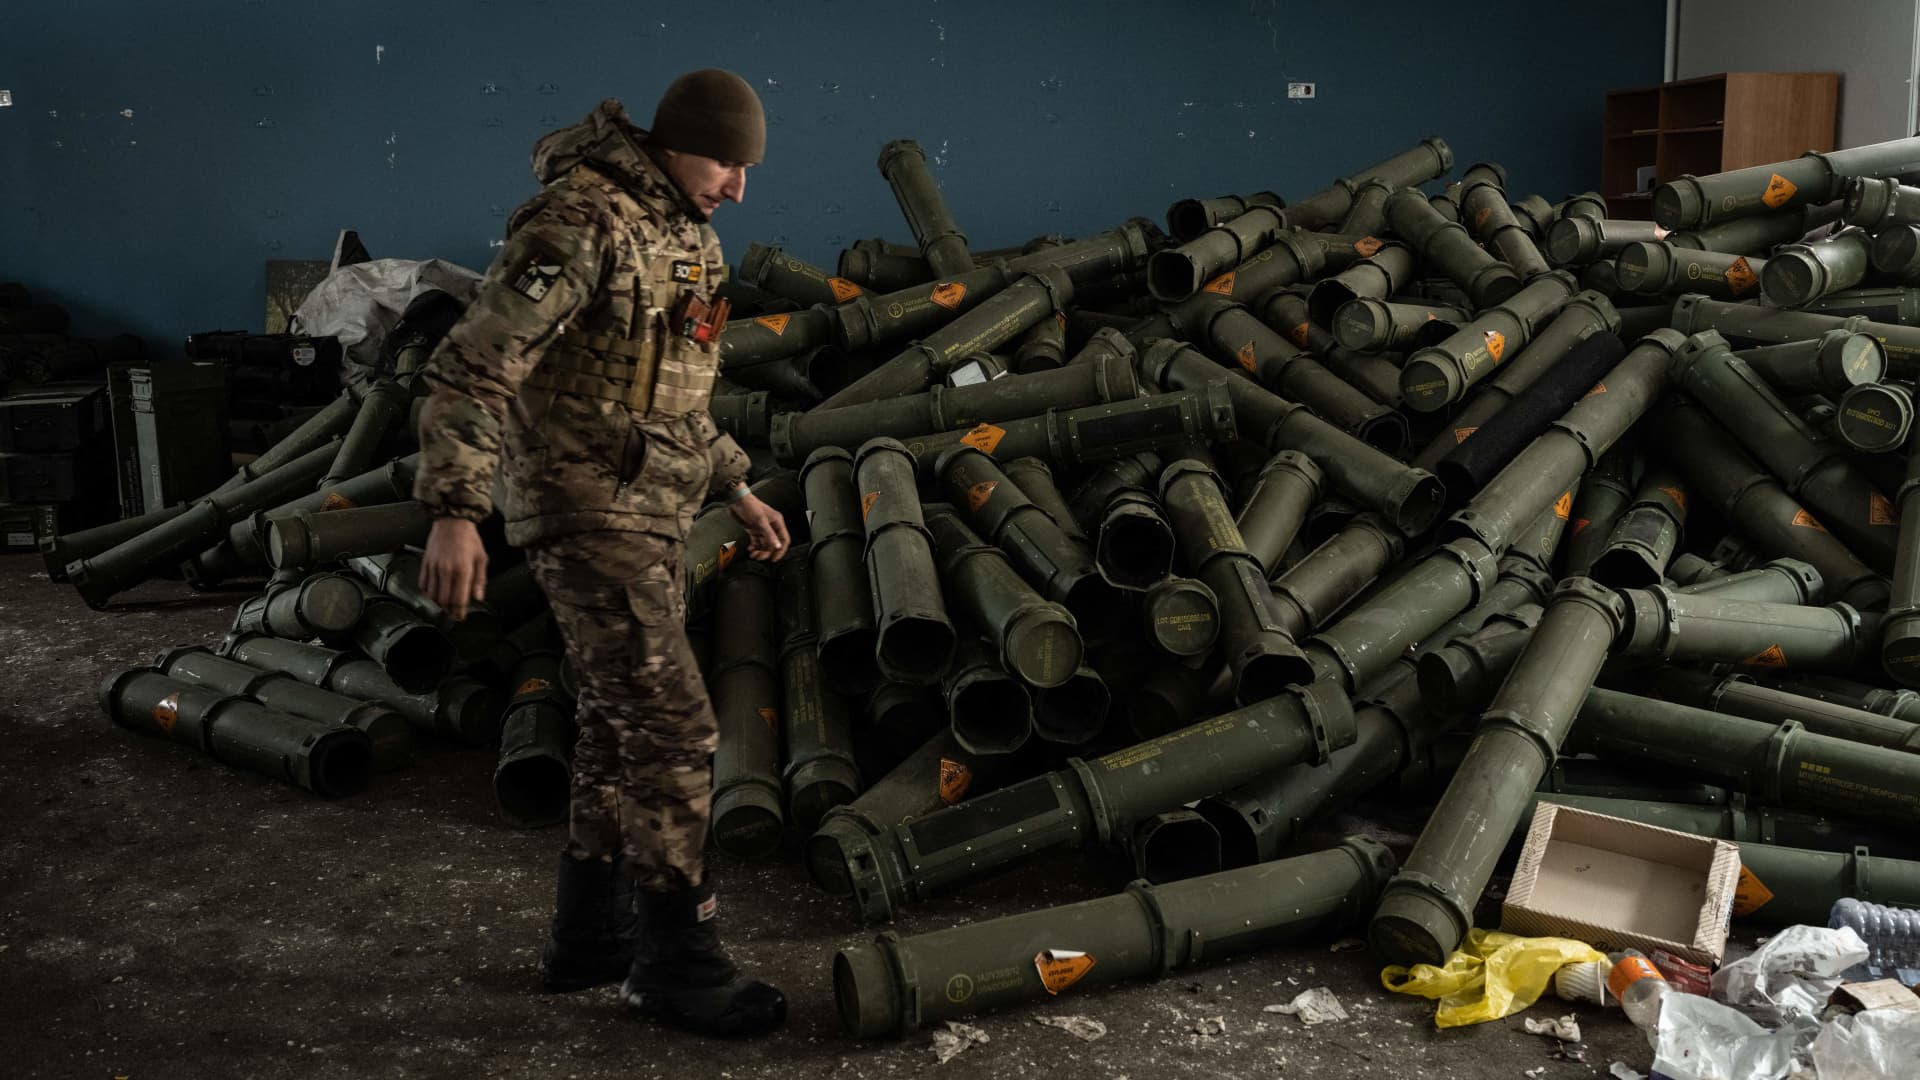 A Ukrainian serviceman of the 93rd brigade stands near a pile of empty mortar shell containers in Bakhmut on February 15, 2023, amid the Russian invasion of Ukraine. 